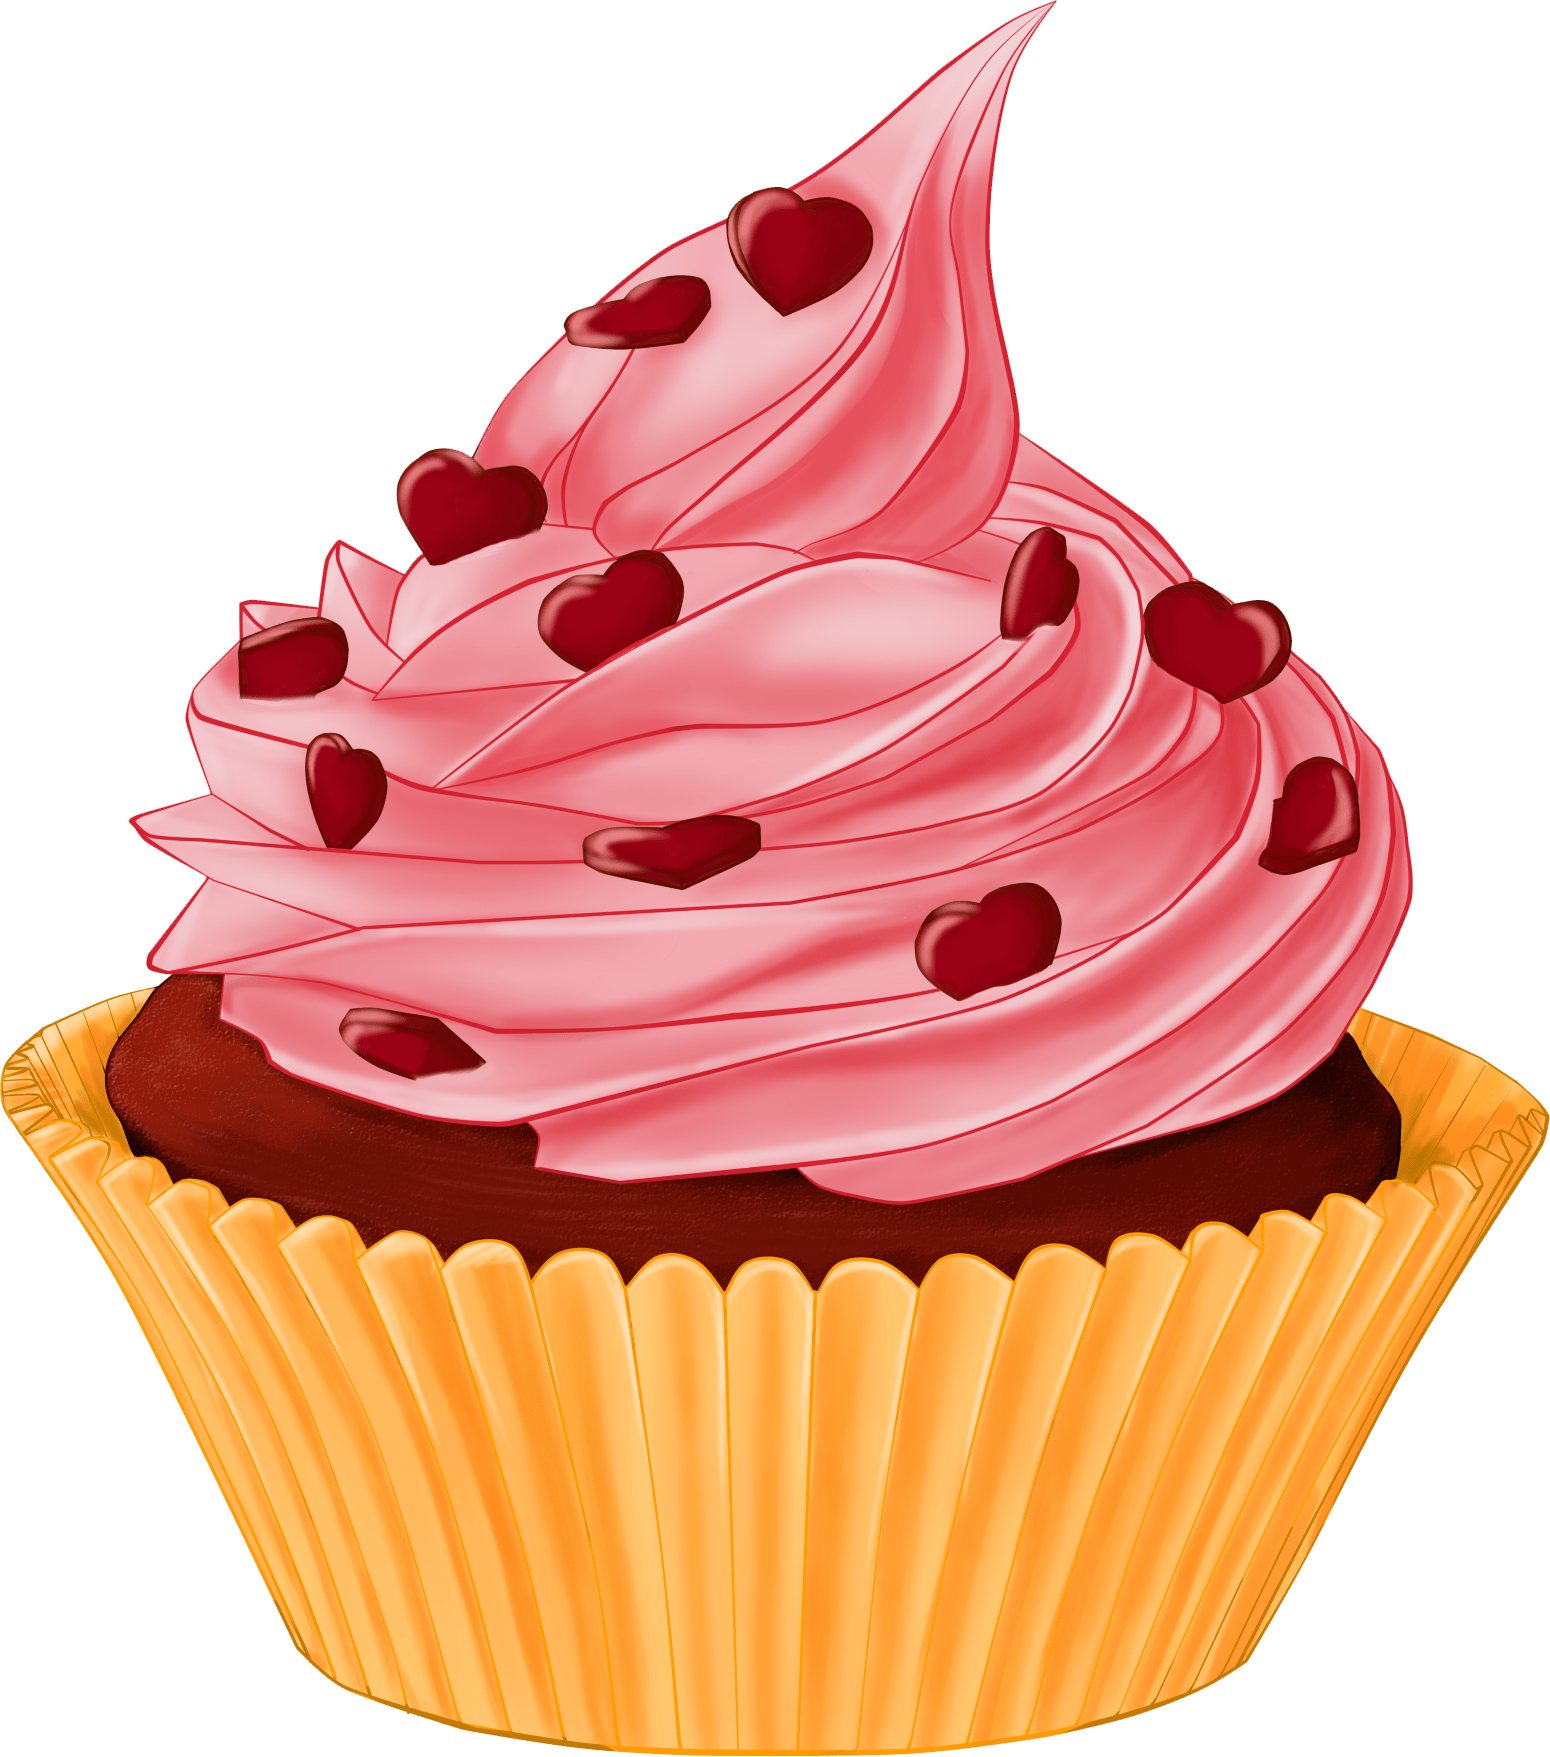 Cake transparent png images. Muffins clipart buttercream